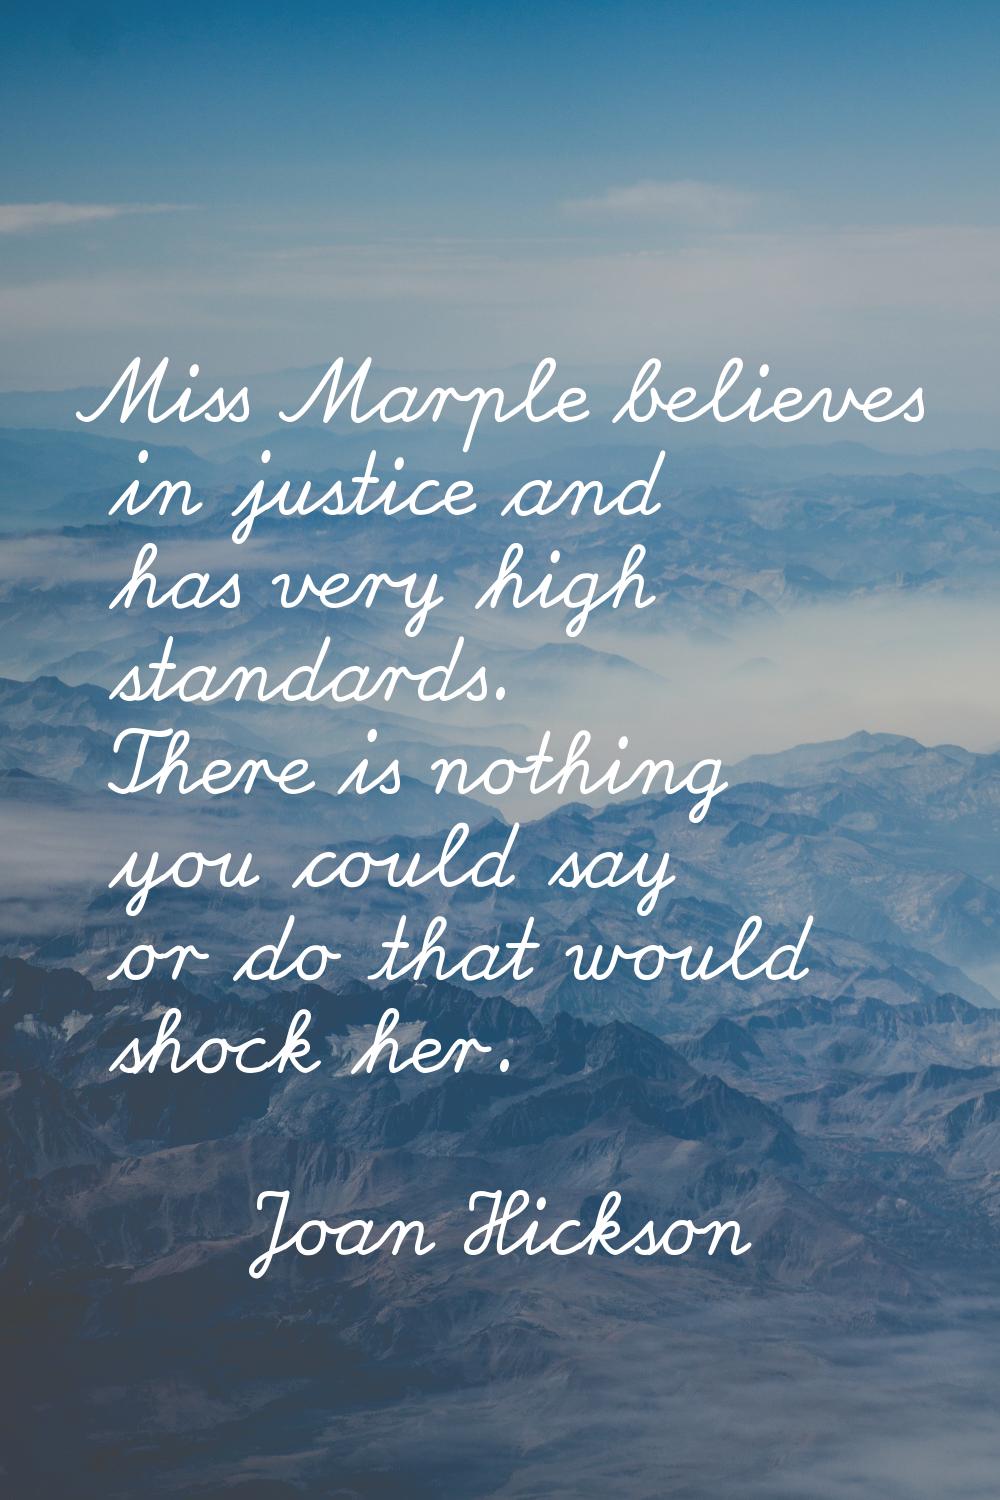 Miss Marple believes in justice and has very high standards. There is nothing you could say or do t